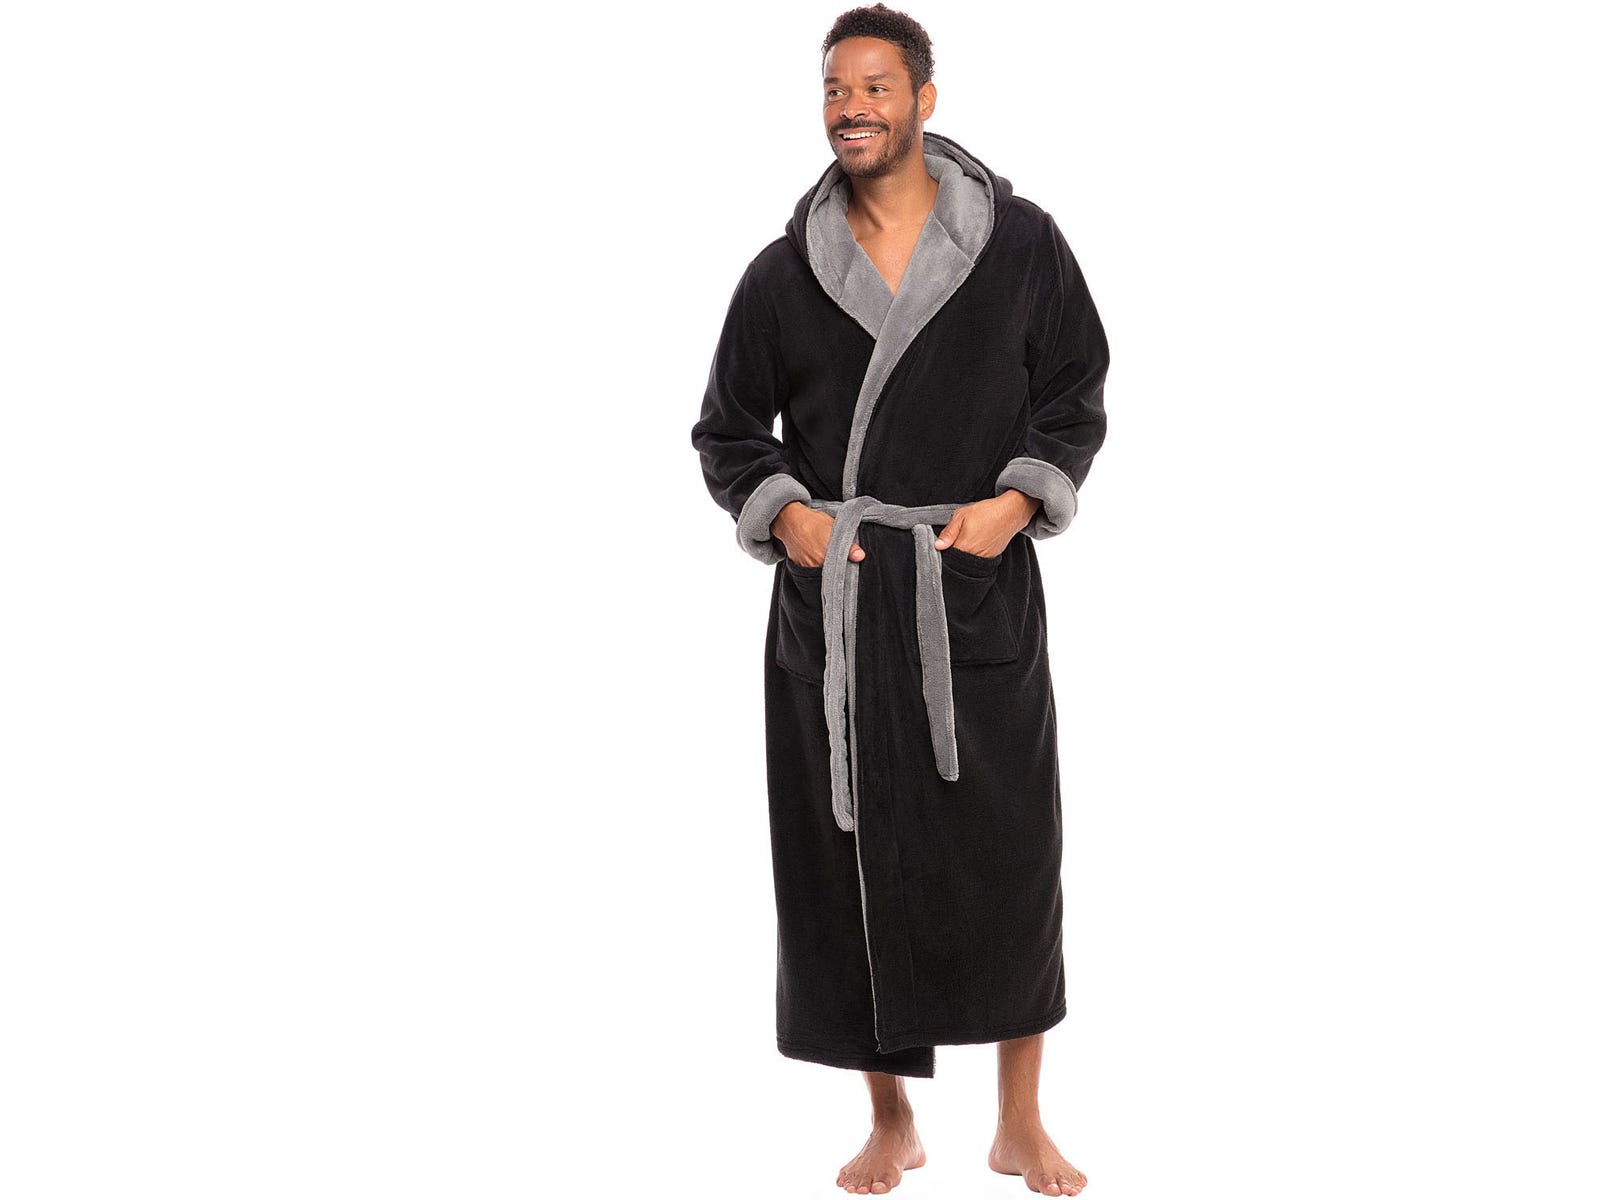 A man wearing a black and grey bathrobe from Alexander Del Rosso